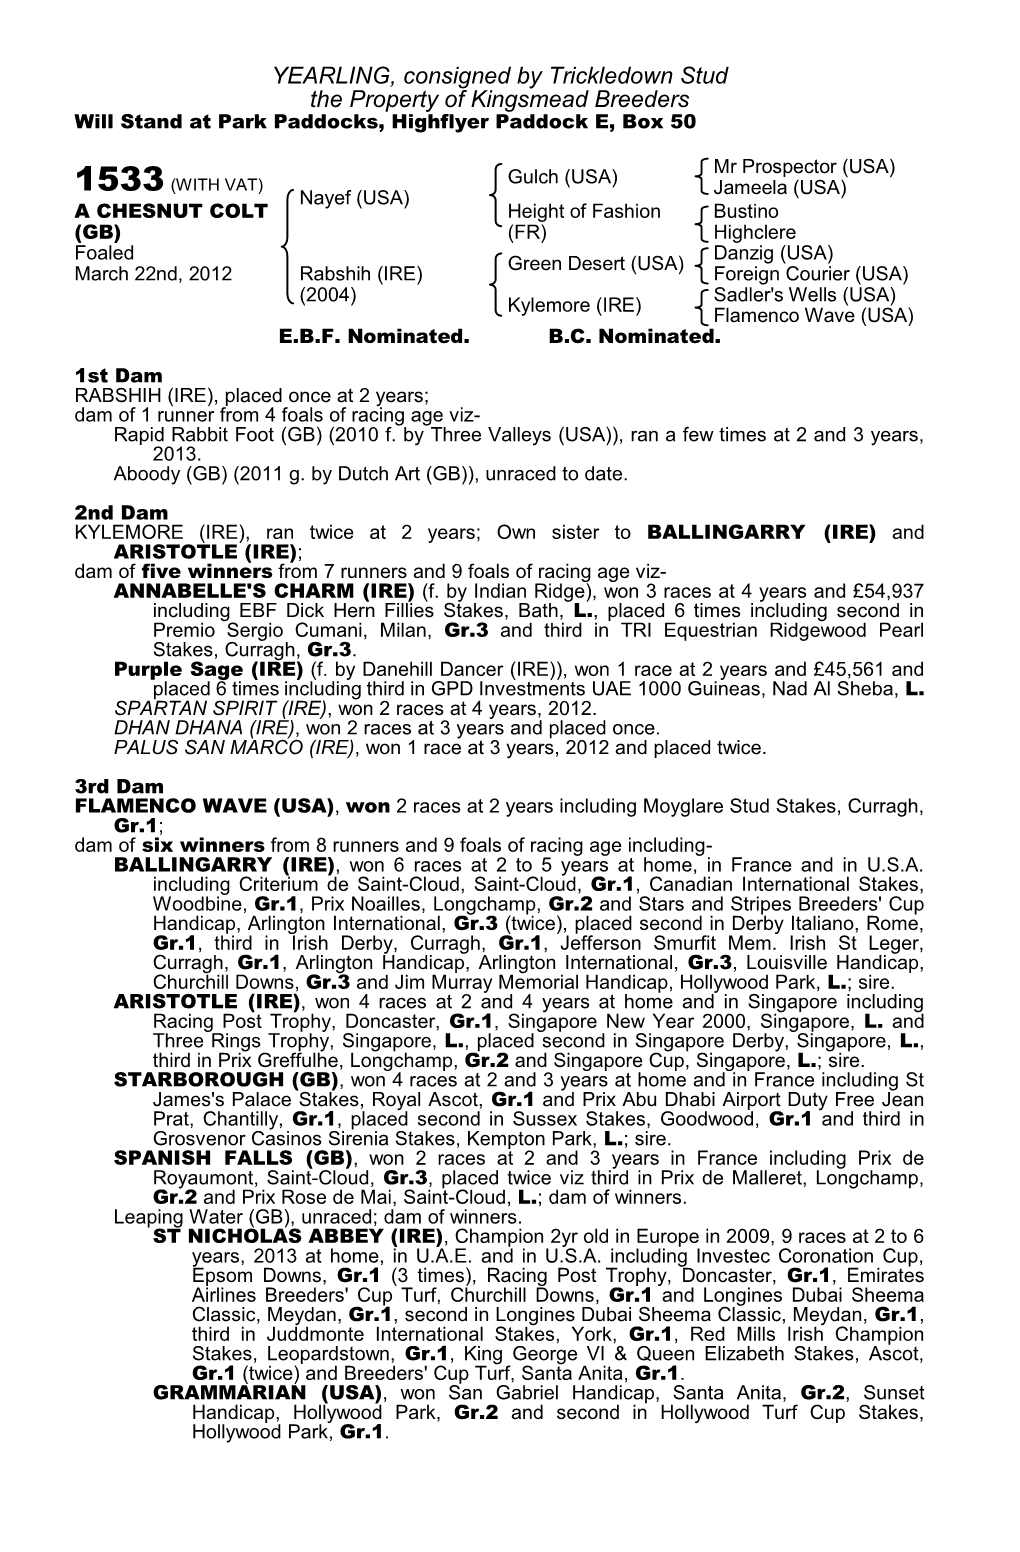 YEARLING, Consigned by Trickledown Stud the Property of Kingsmead Breeders Will Stand at Park Paddocks, Highflyer Paddock E, Box 50